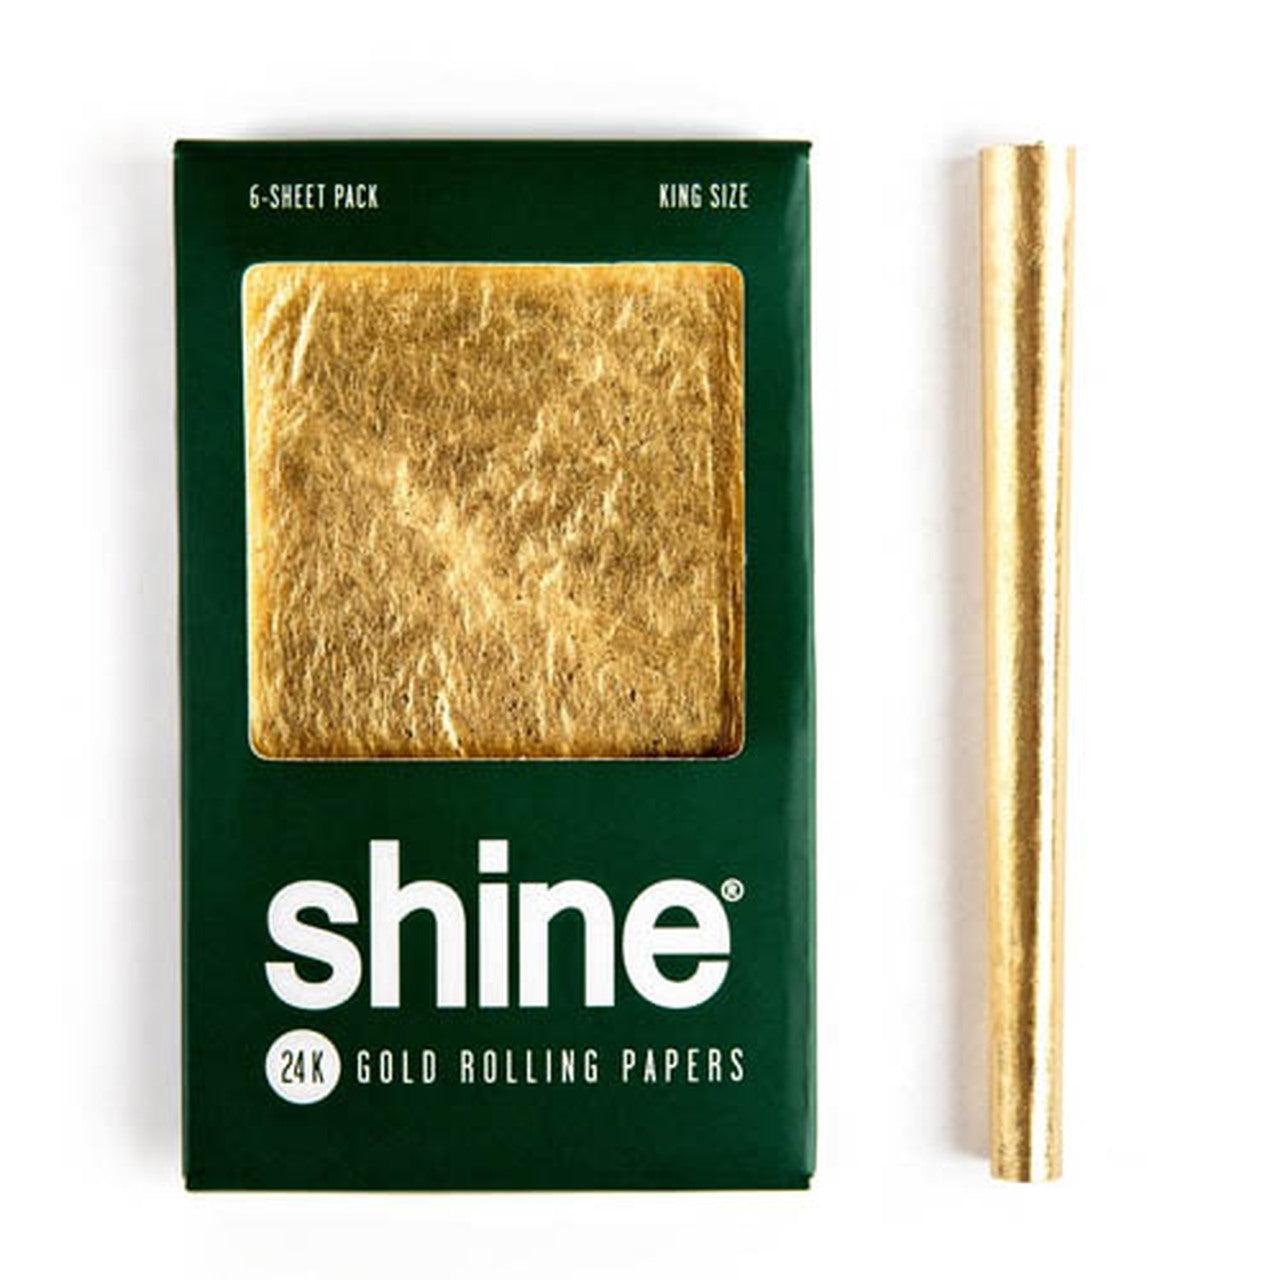 Shine 24k Gold Rolling Papers - King Size 6-Sheet Pack - Insomnia Smoke